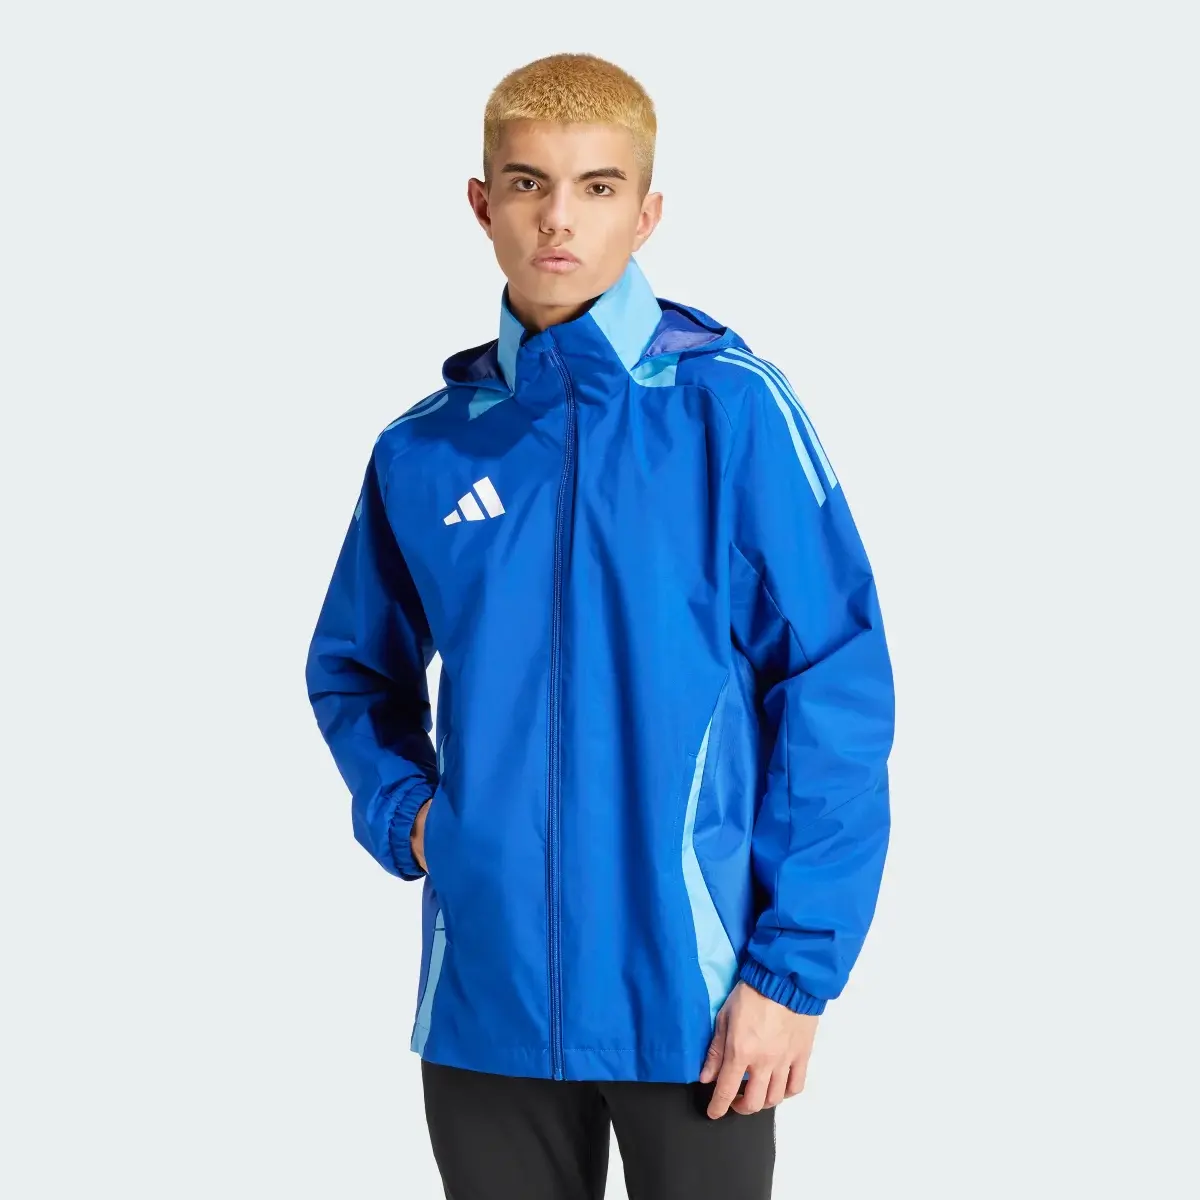 Adidas Tiro 24 Competition All-Weather Jacket. 2